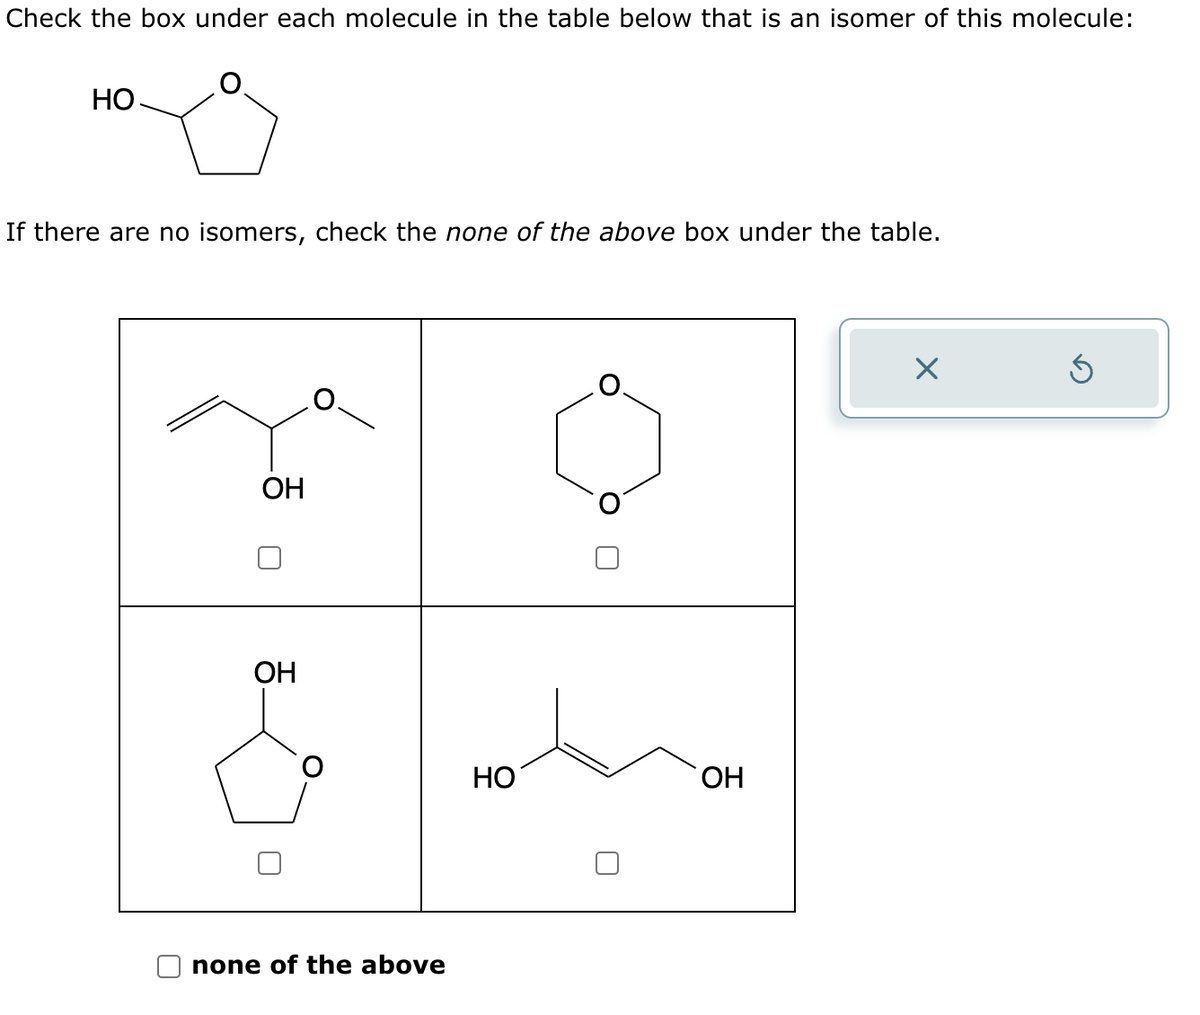 Check the box under each molecule in the table below that is an isomer of this molecule:
HO
If there are no isomers, check the none of the above box under the table.
Он
Он
none of the above
но
ОН
Х
б